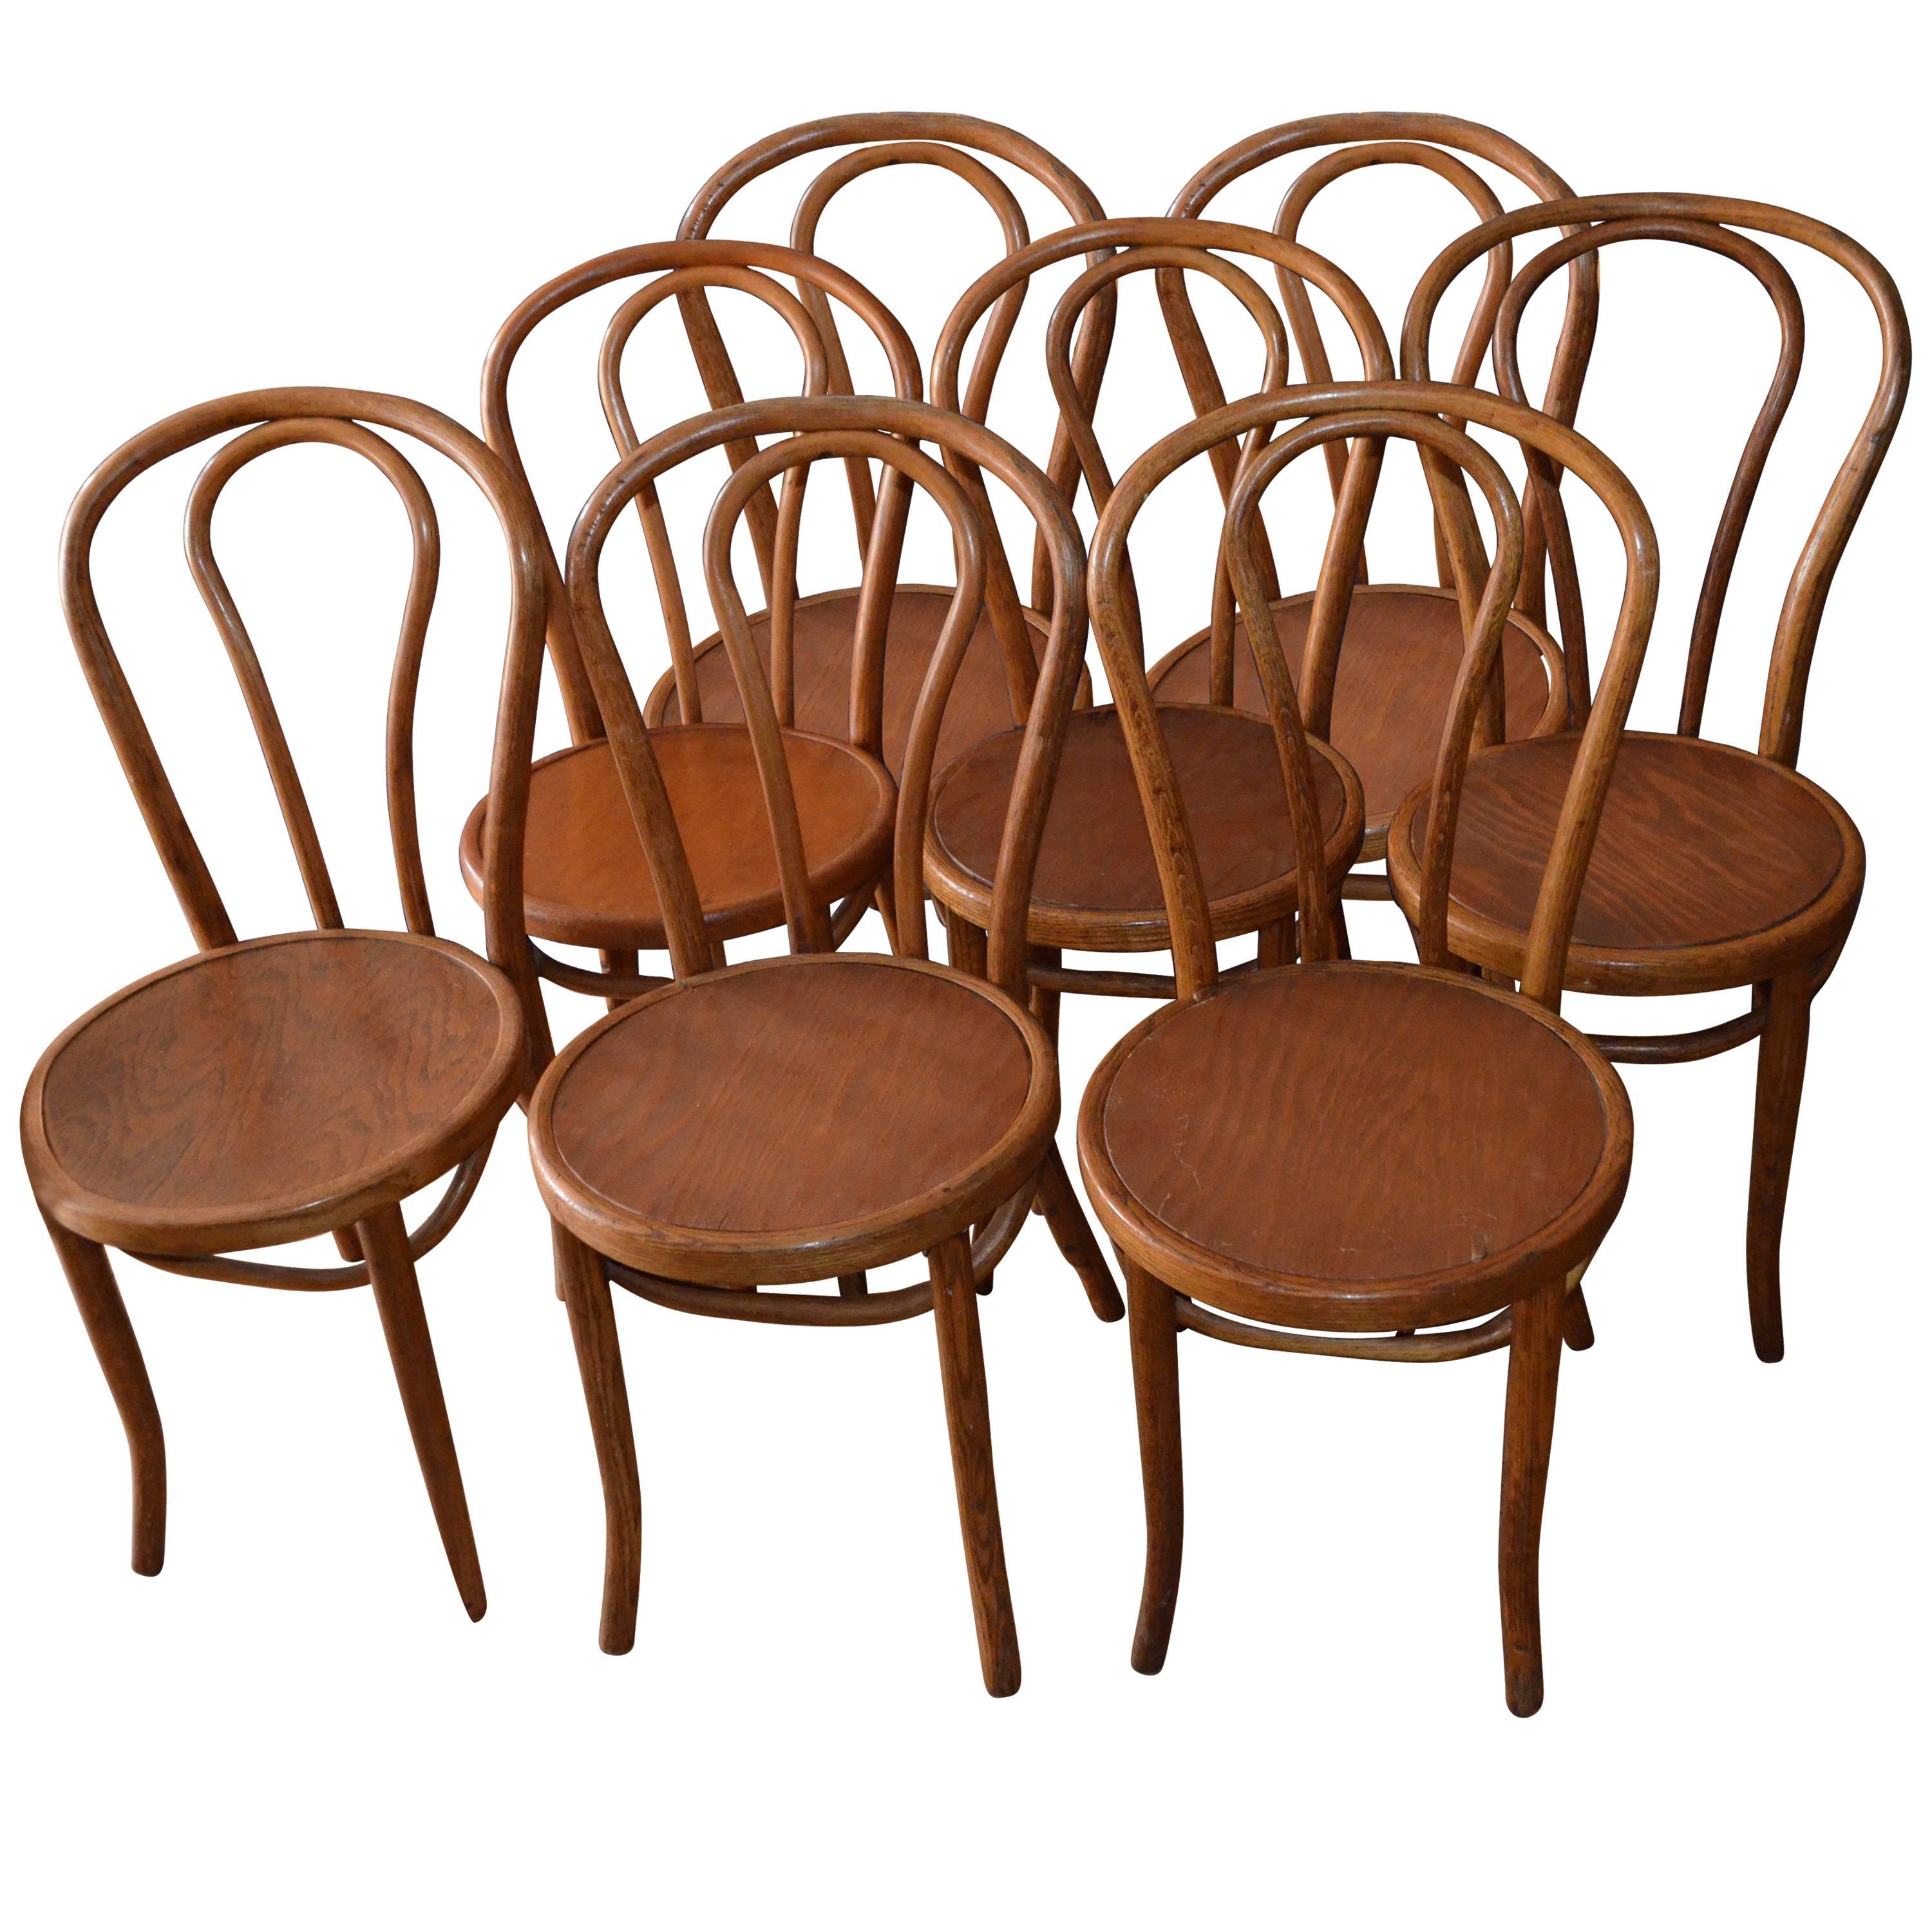 Bentwood Dining Chairs 'Set of Eight' of Solid Oak with Plywood Seats from 1947